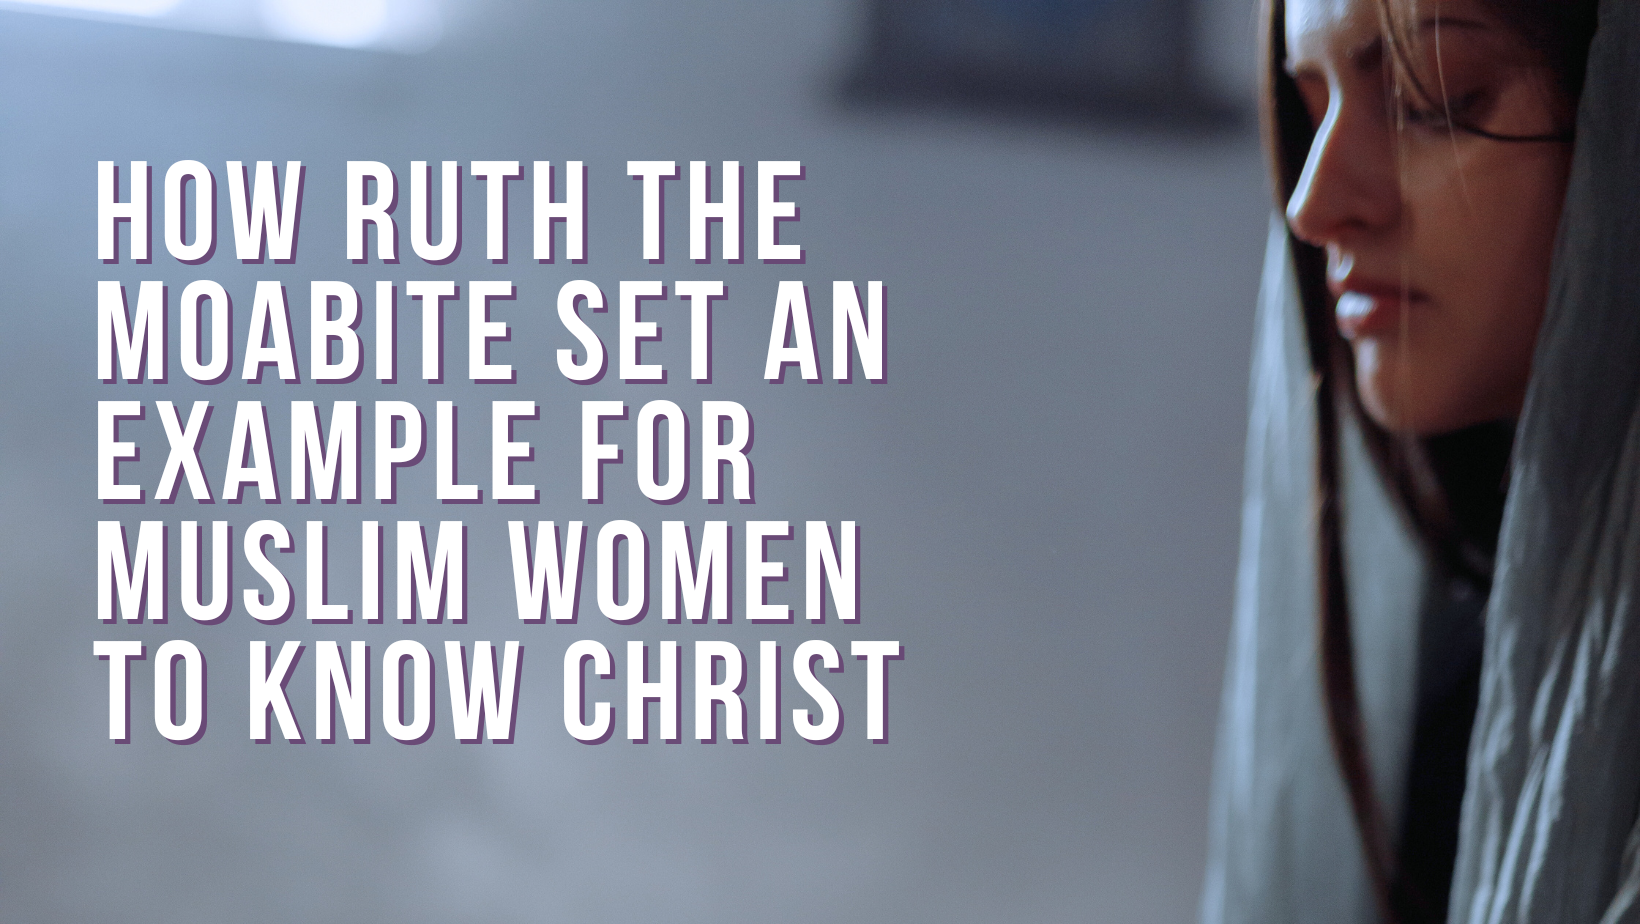 How Ruth the Moabite set an example for Muslim Women to know Christ